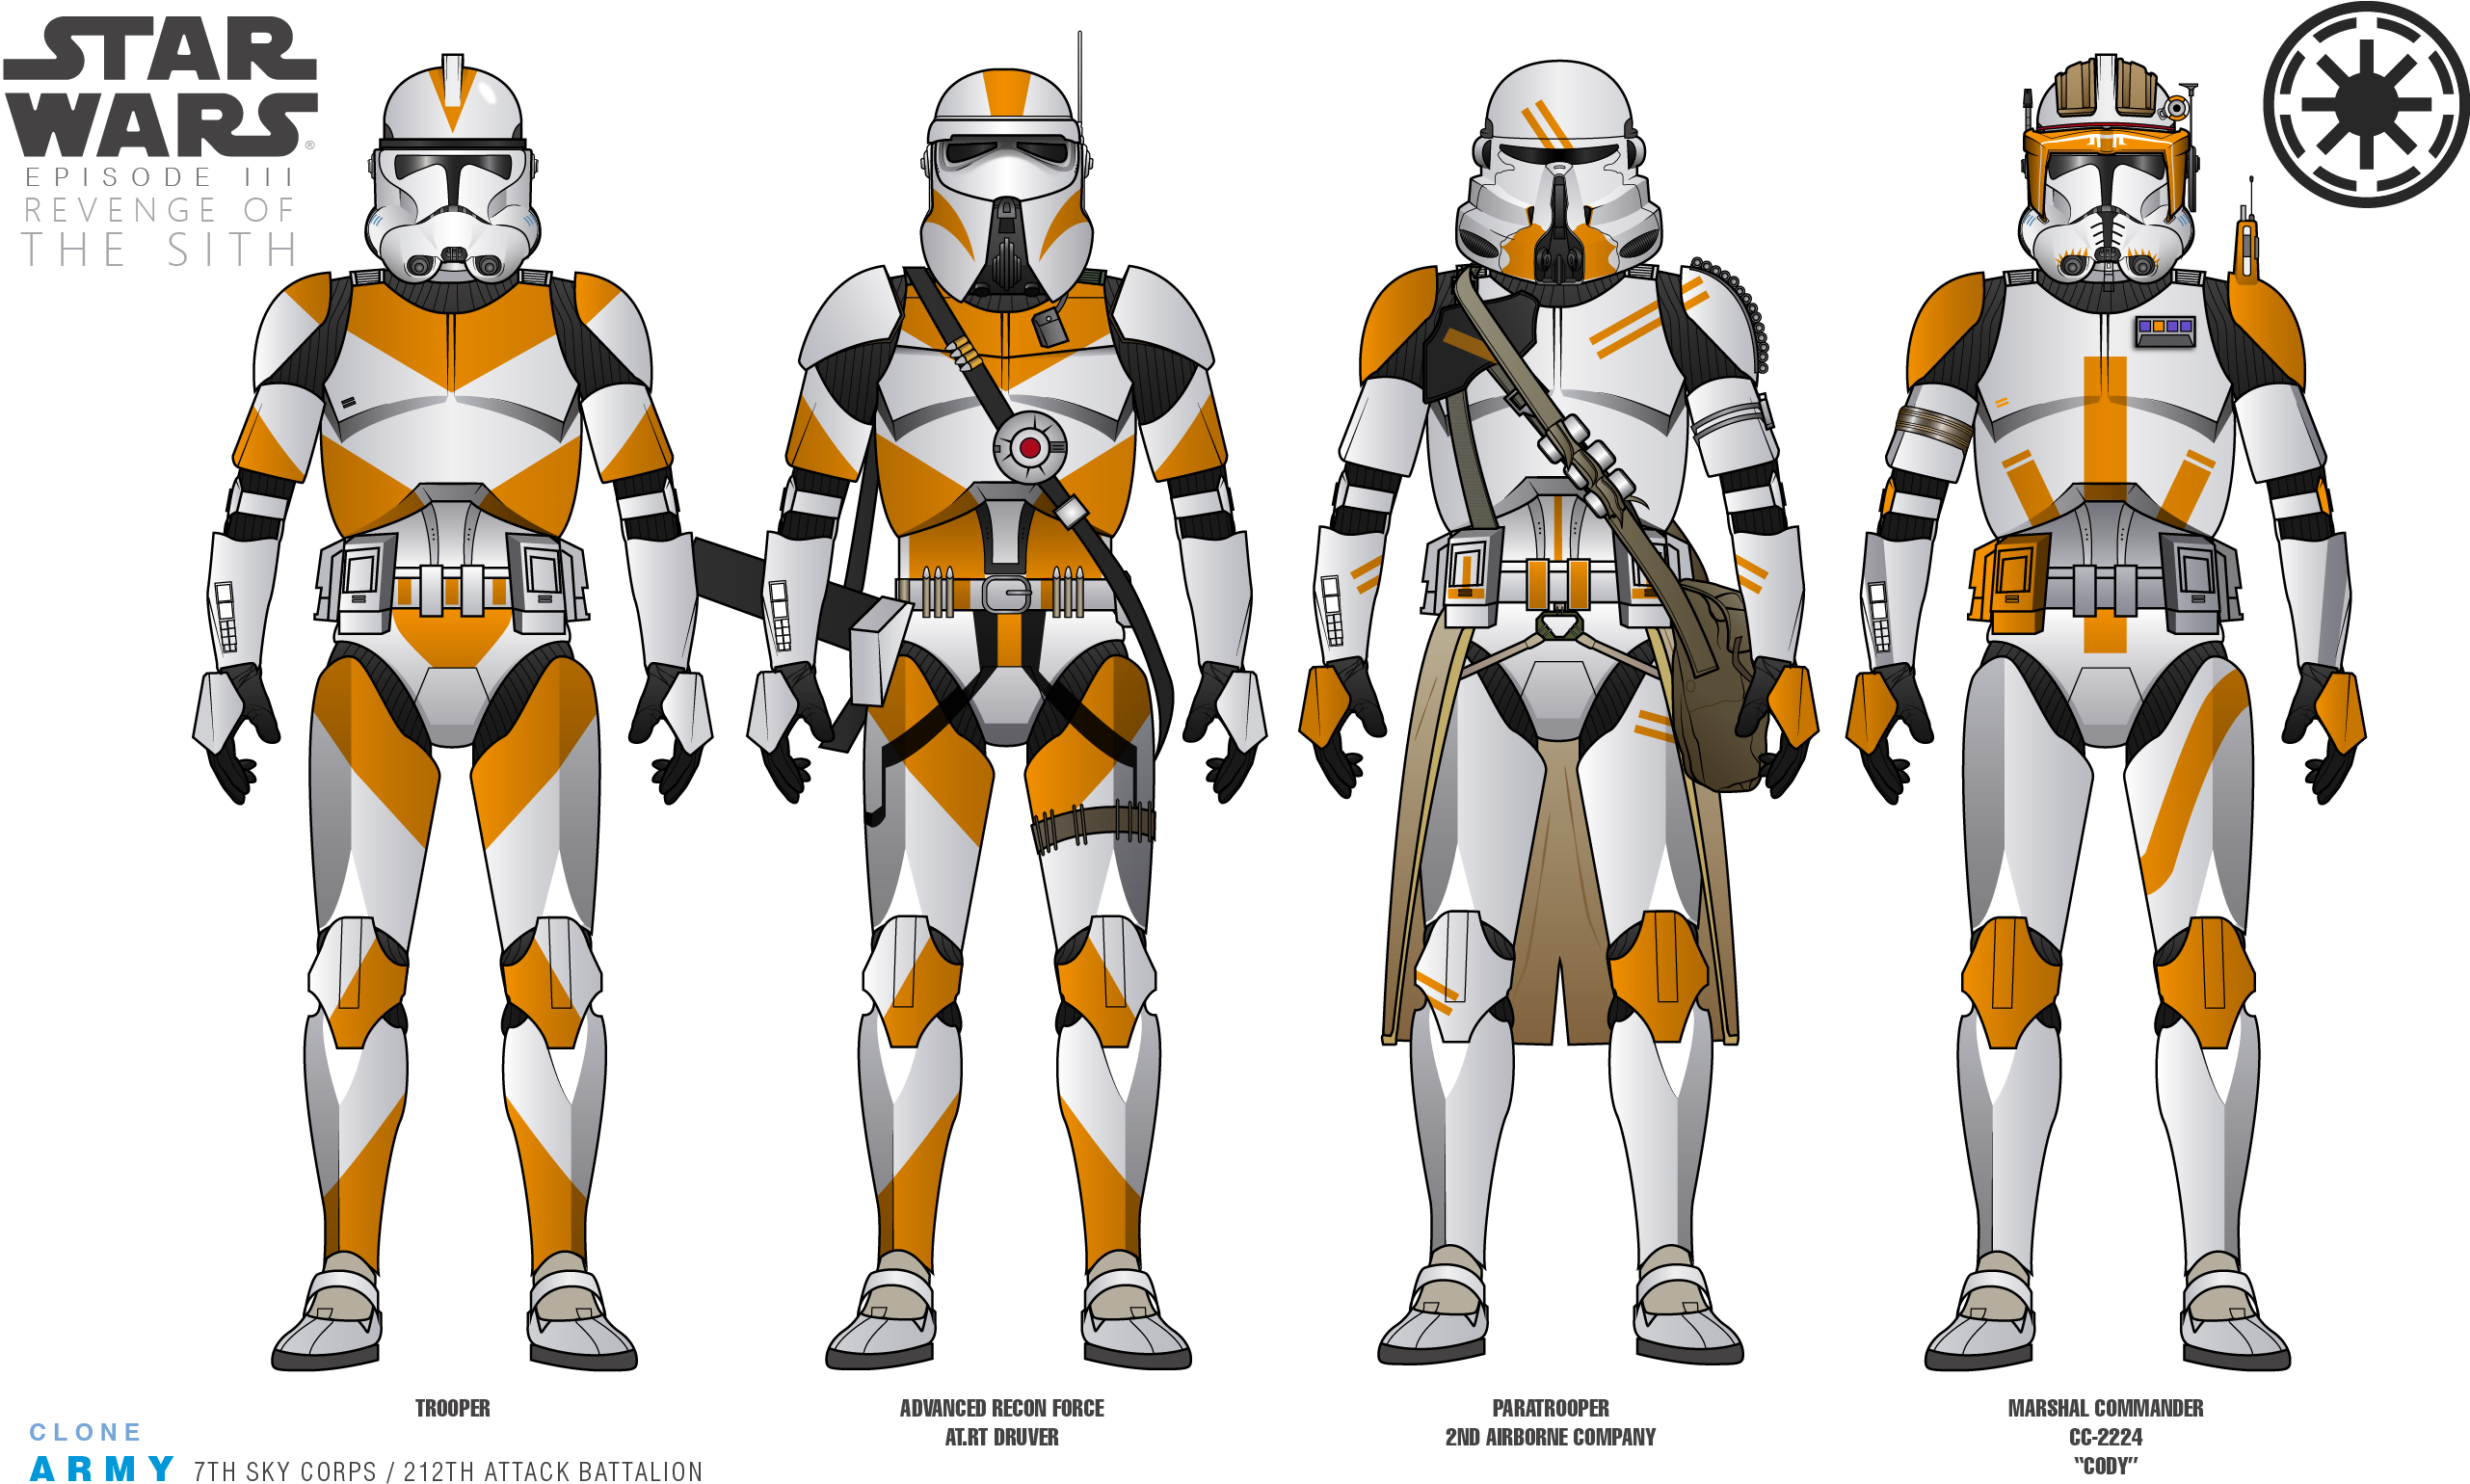 7th Sky Corps By Efrajoey1 Star Wars Baby, Clone Trooper, - Star Wars 7th.....